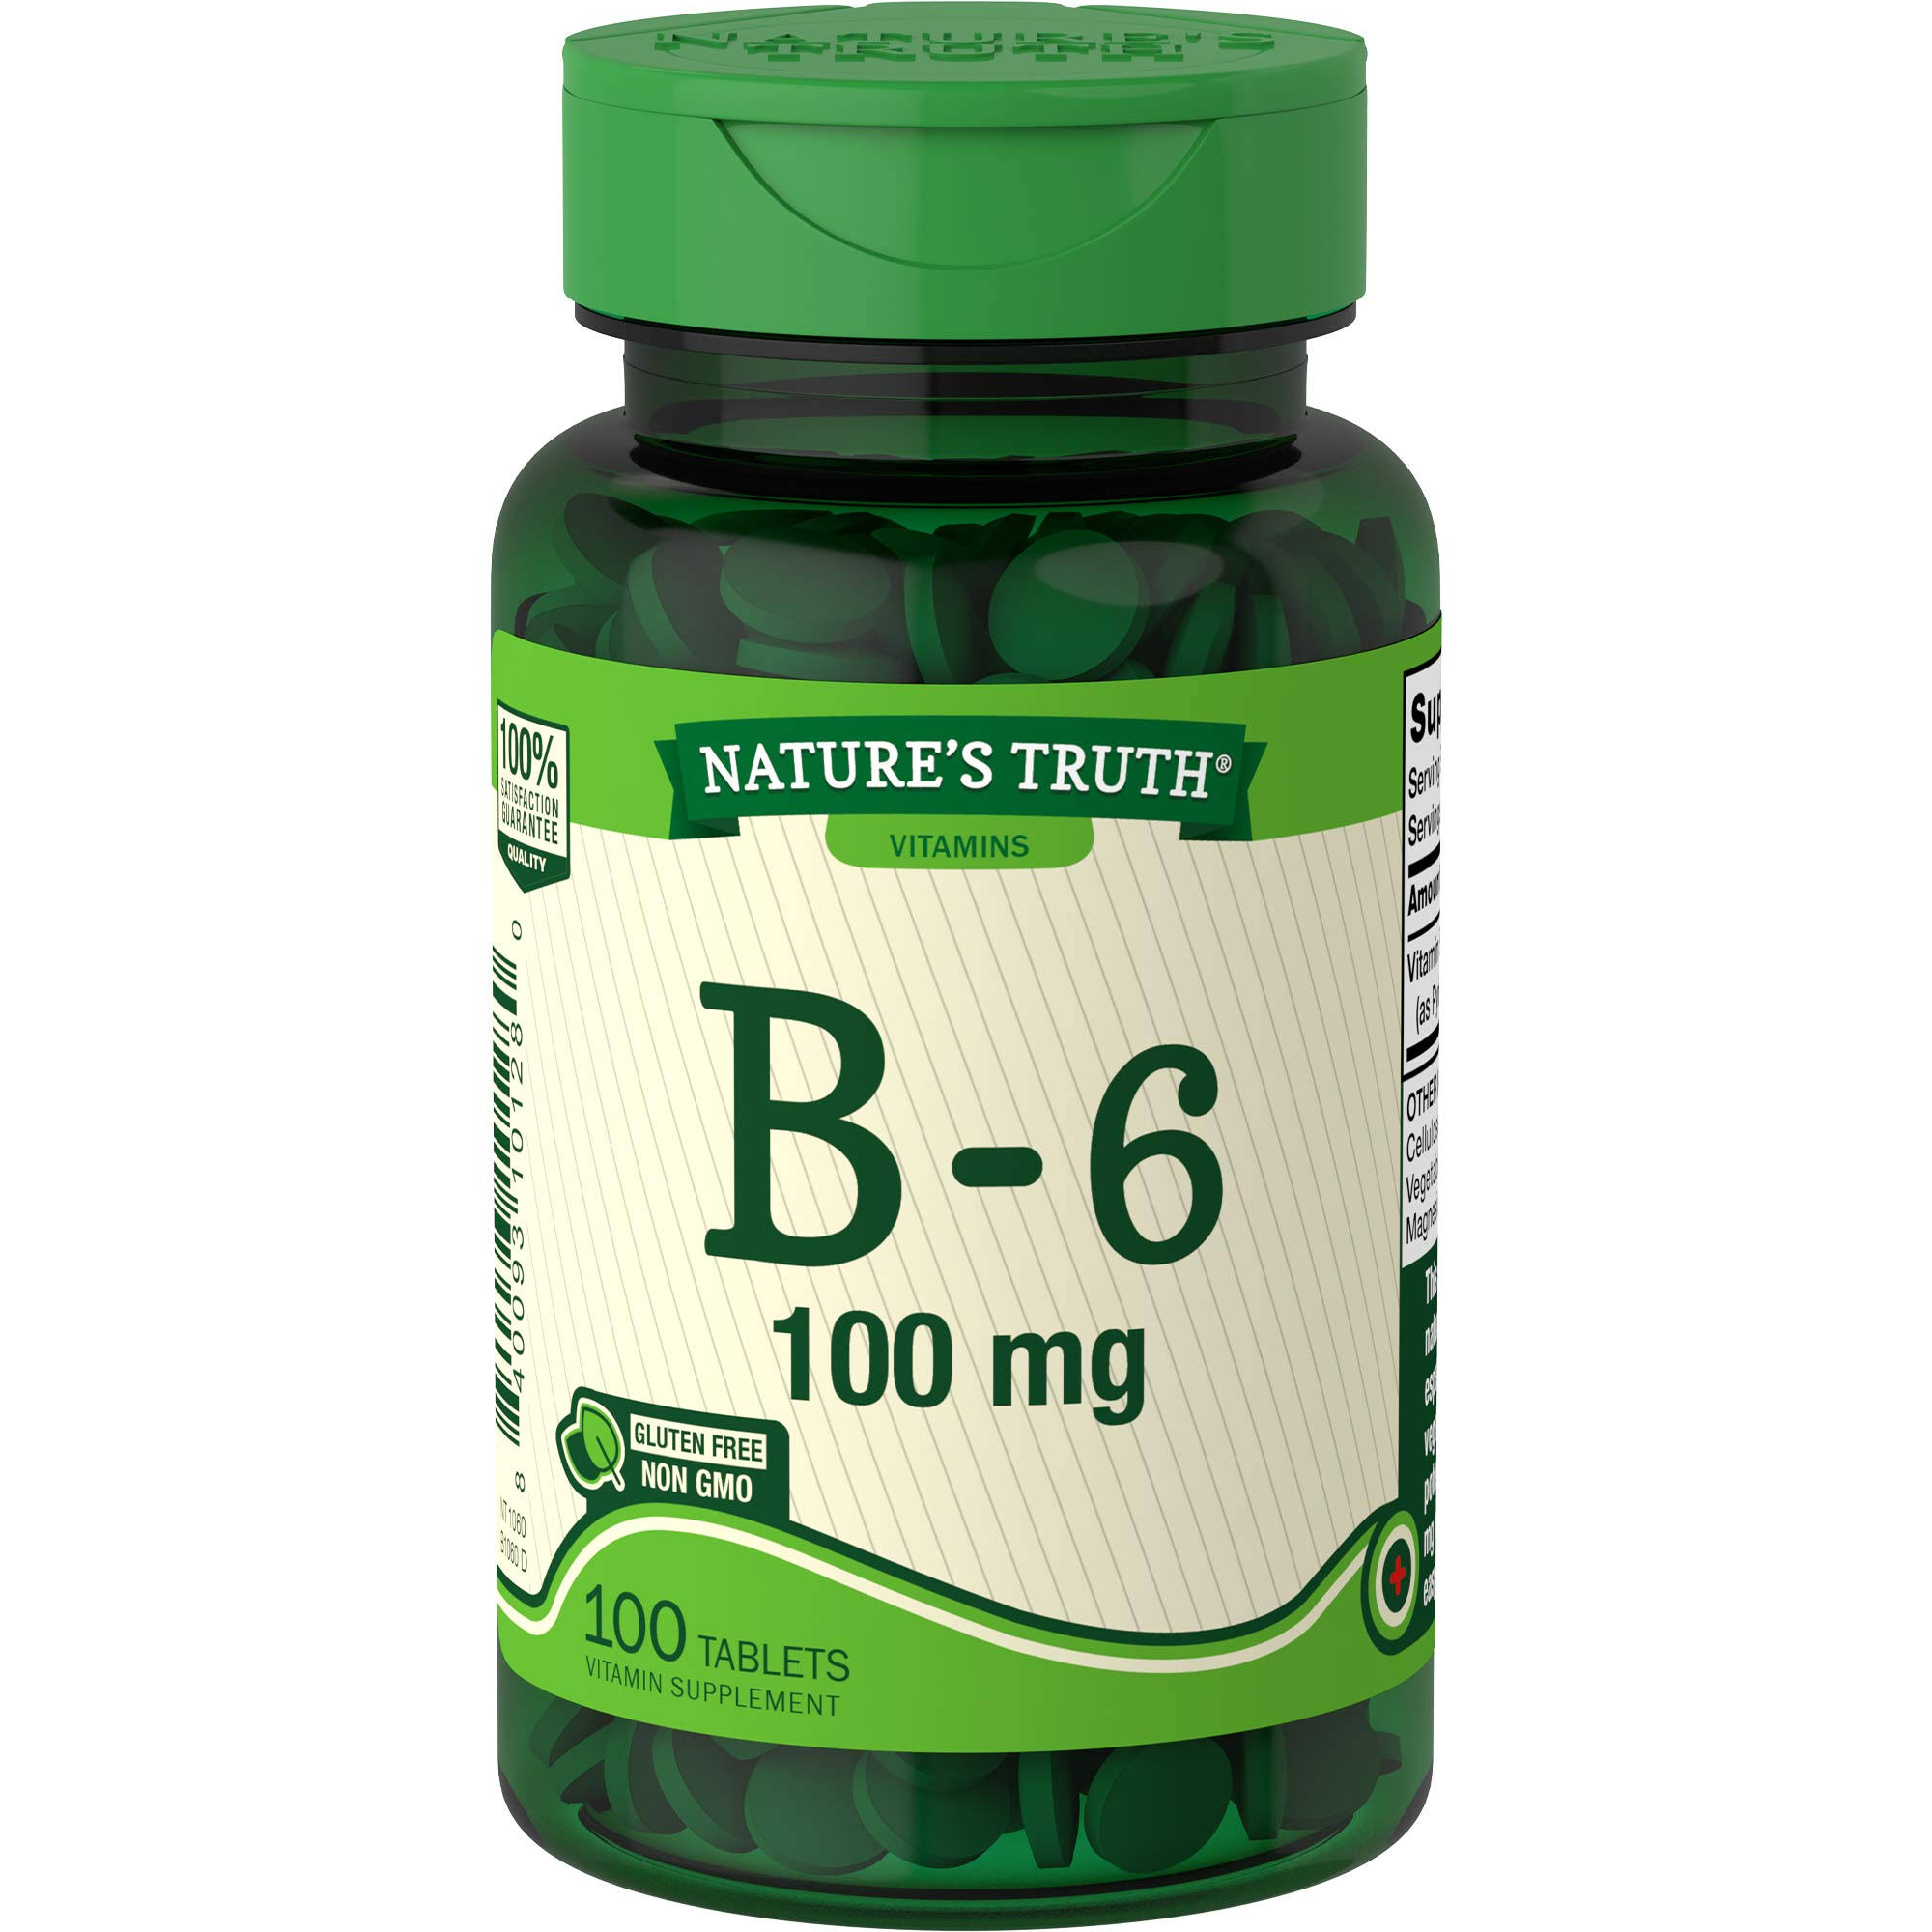 Nature's Truth Vitamin B-6 100mg TABLETS, 100 Count